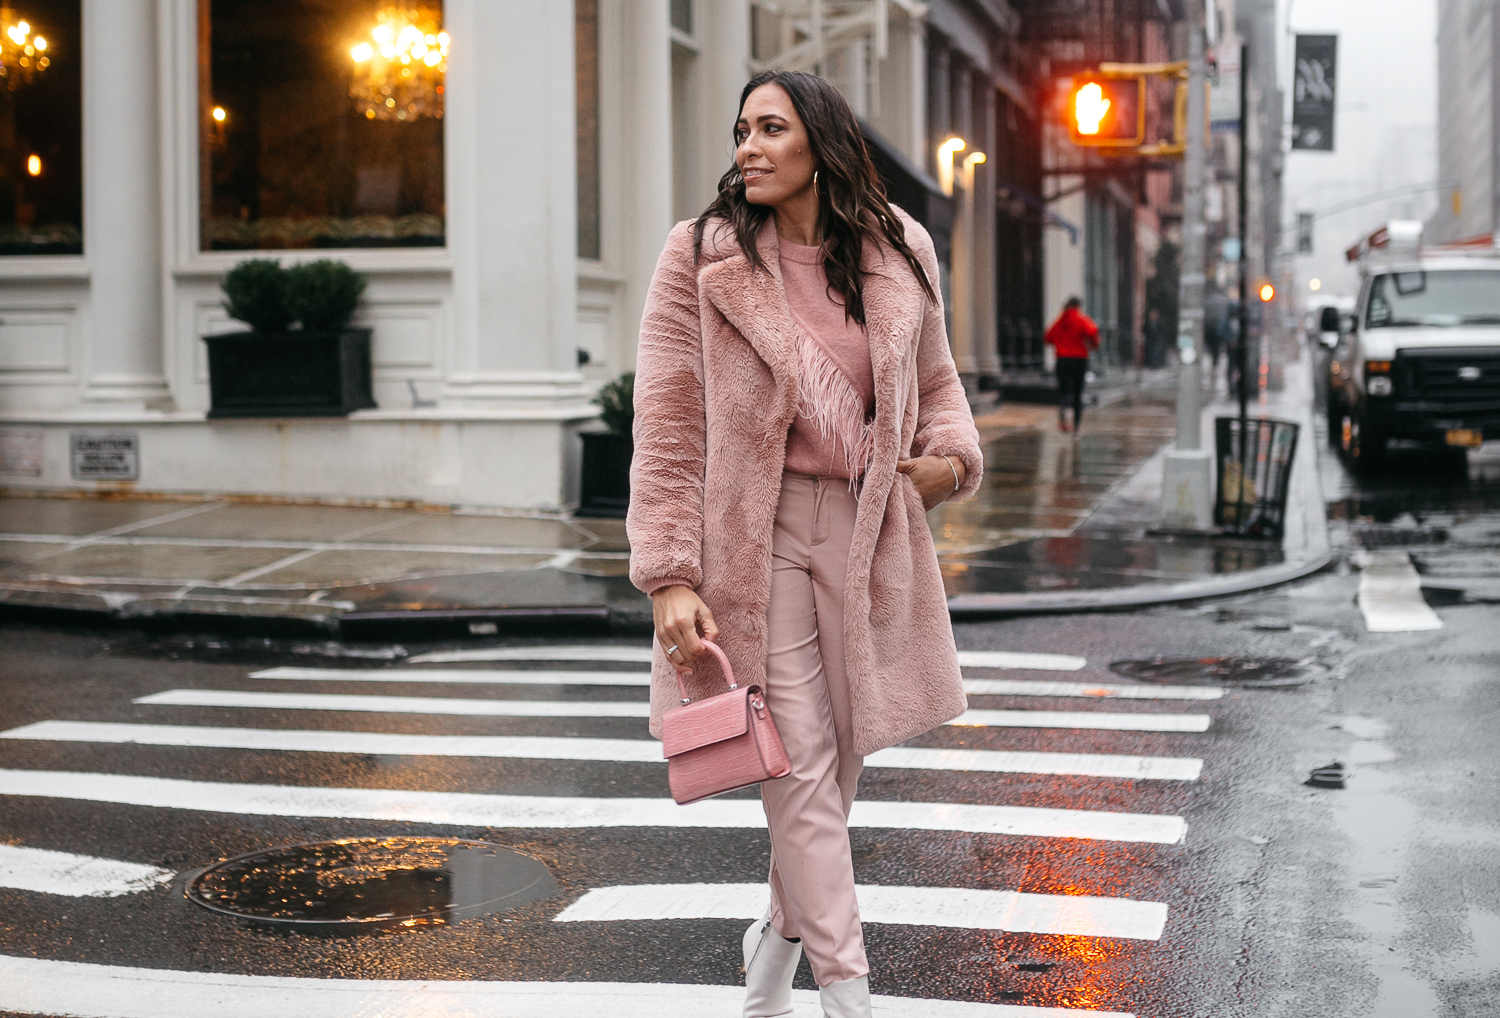 Amanda wears a blush monochrome look at day two of NYFW in Soho